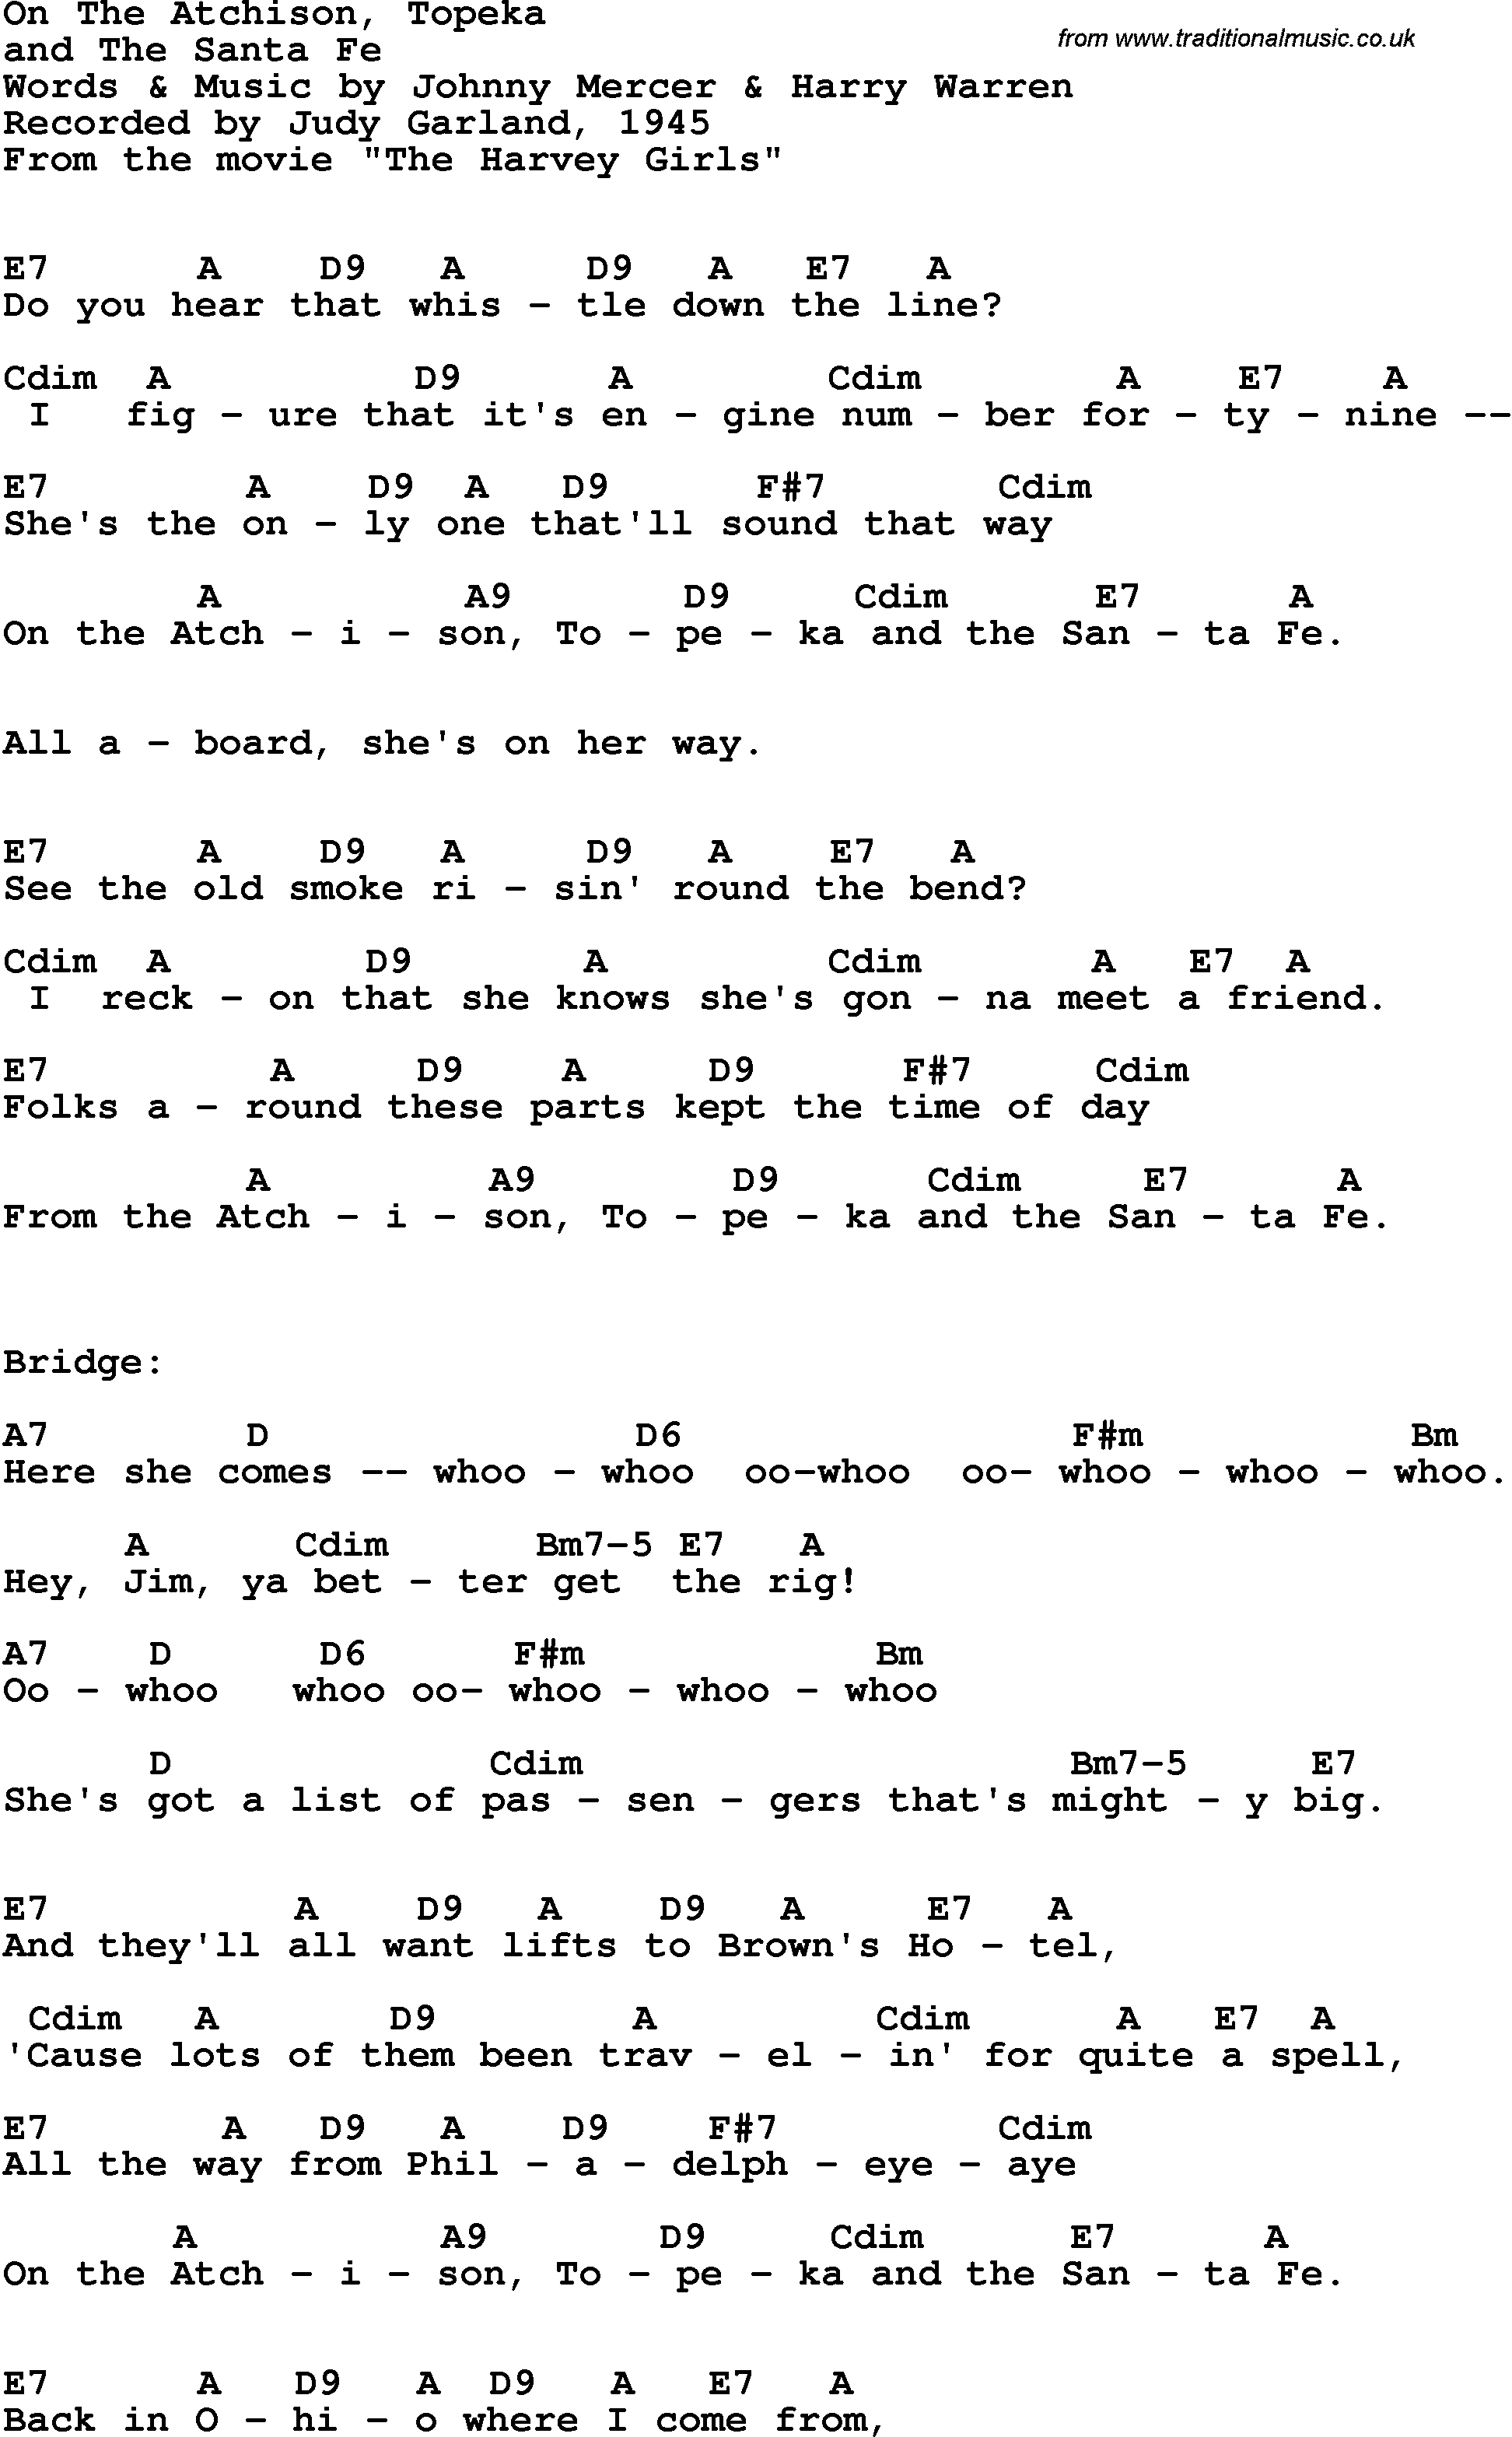 Song Lyrics with guitar chords for On The Atchison, Topeka And The Santa Fe - Judy Garland, 1945